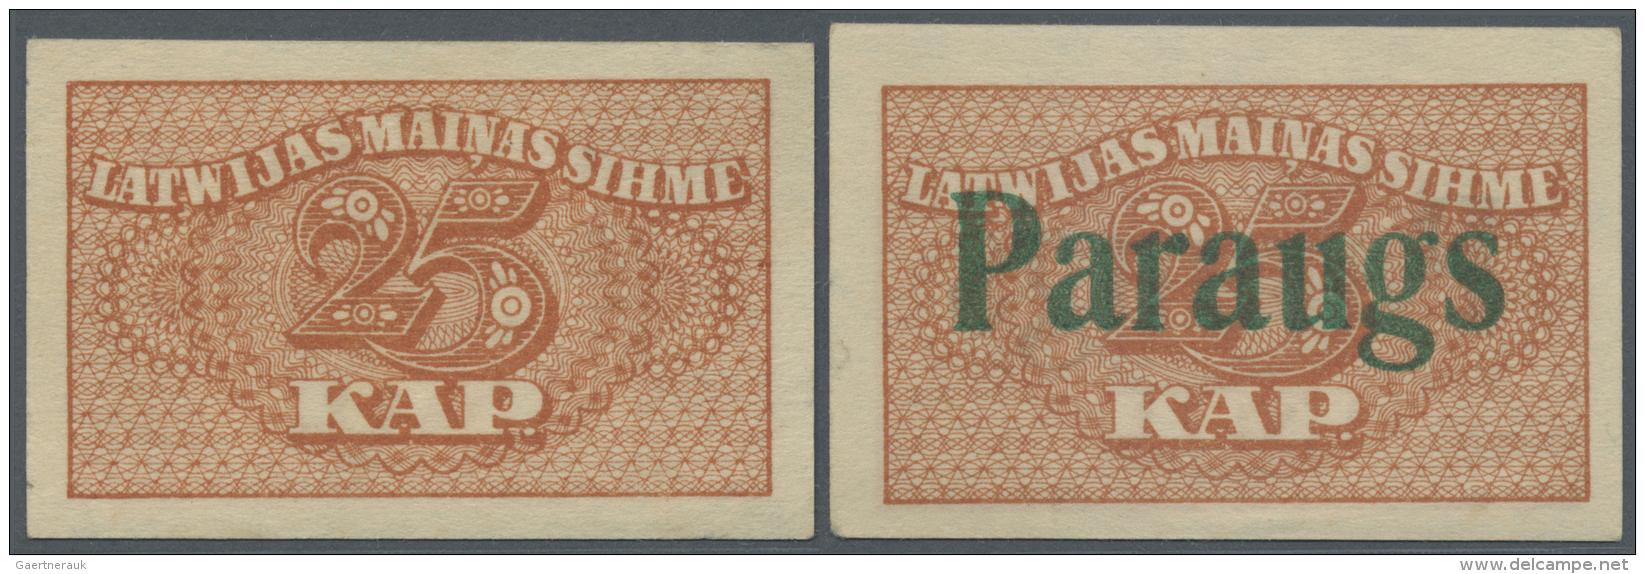 Latvia /Lettland: Set Of 2 Notes 25 Kap. 1920 As SPECIMEN And Regular Issue, P. 11s And P. 11, The Specimen Overprinted - Lettonie